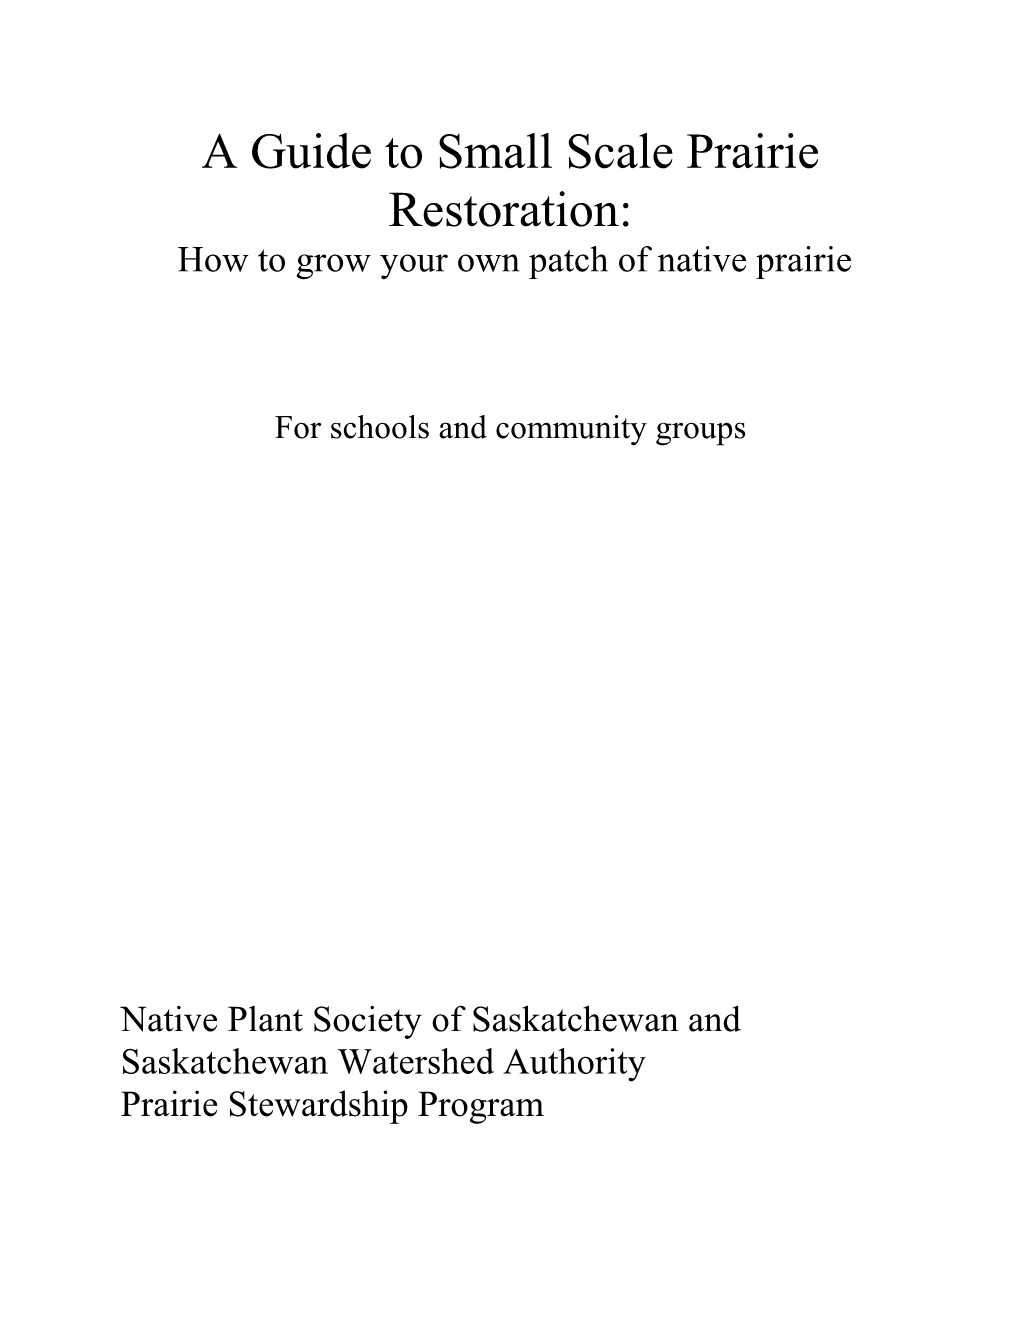 A Guide to Small Scale Prairie Restoration for Schools